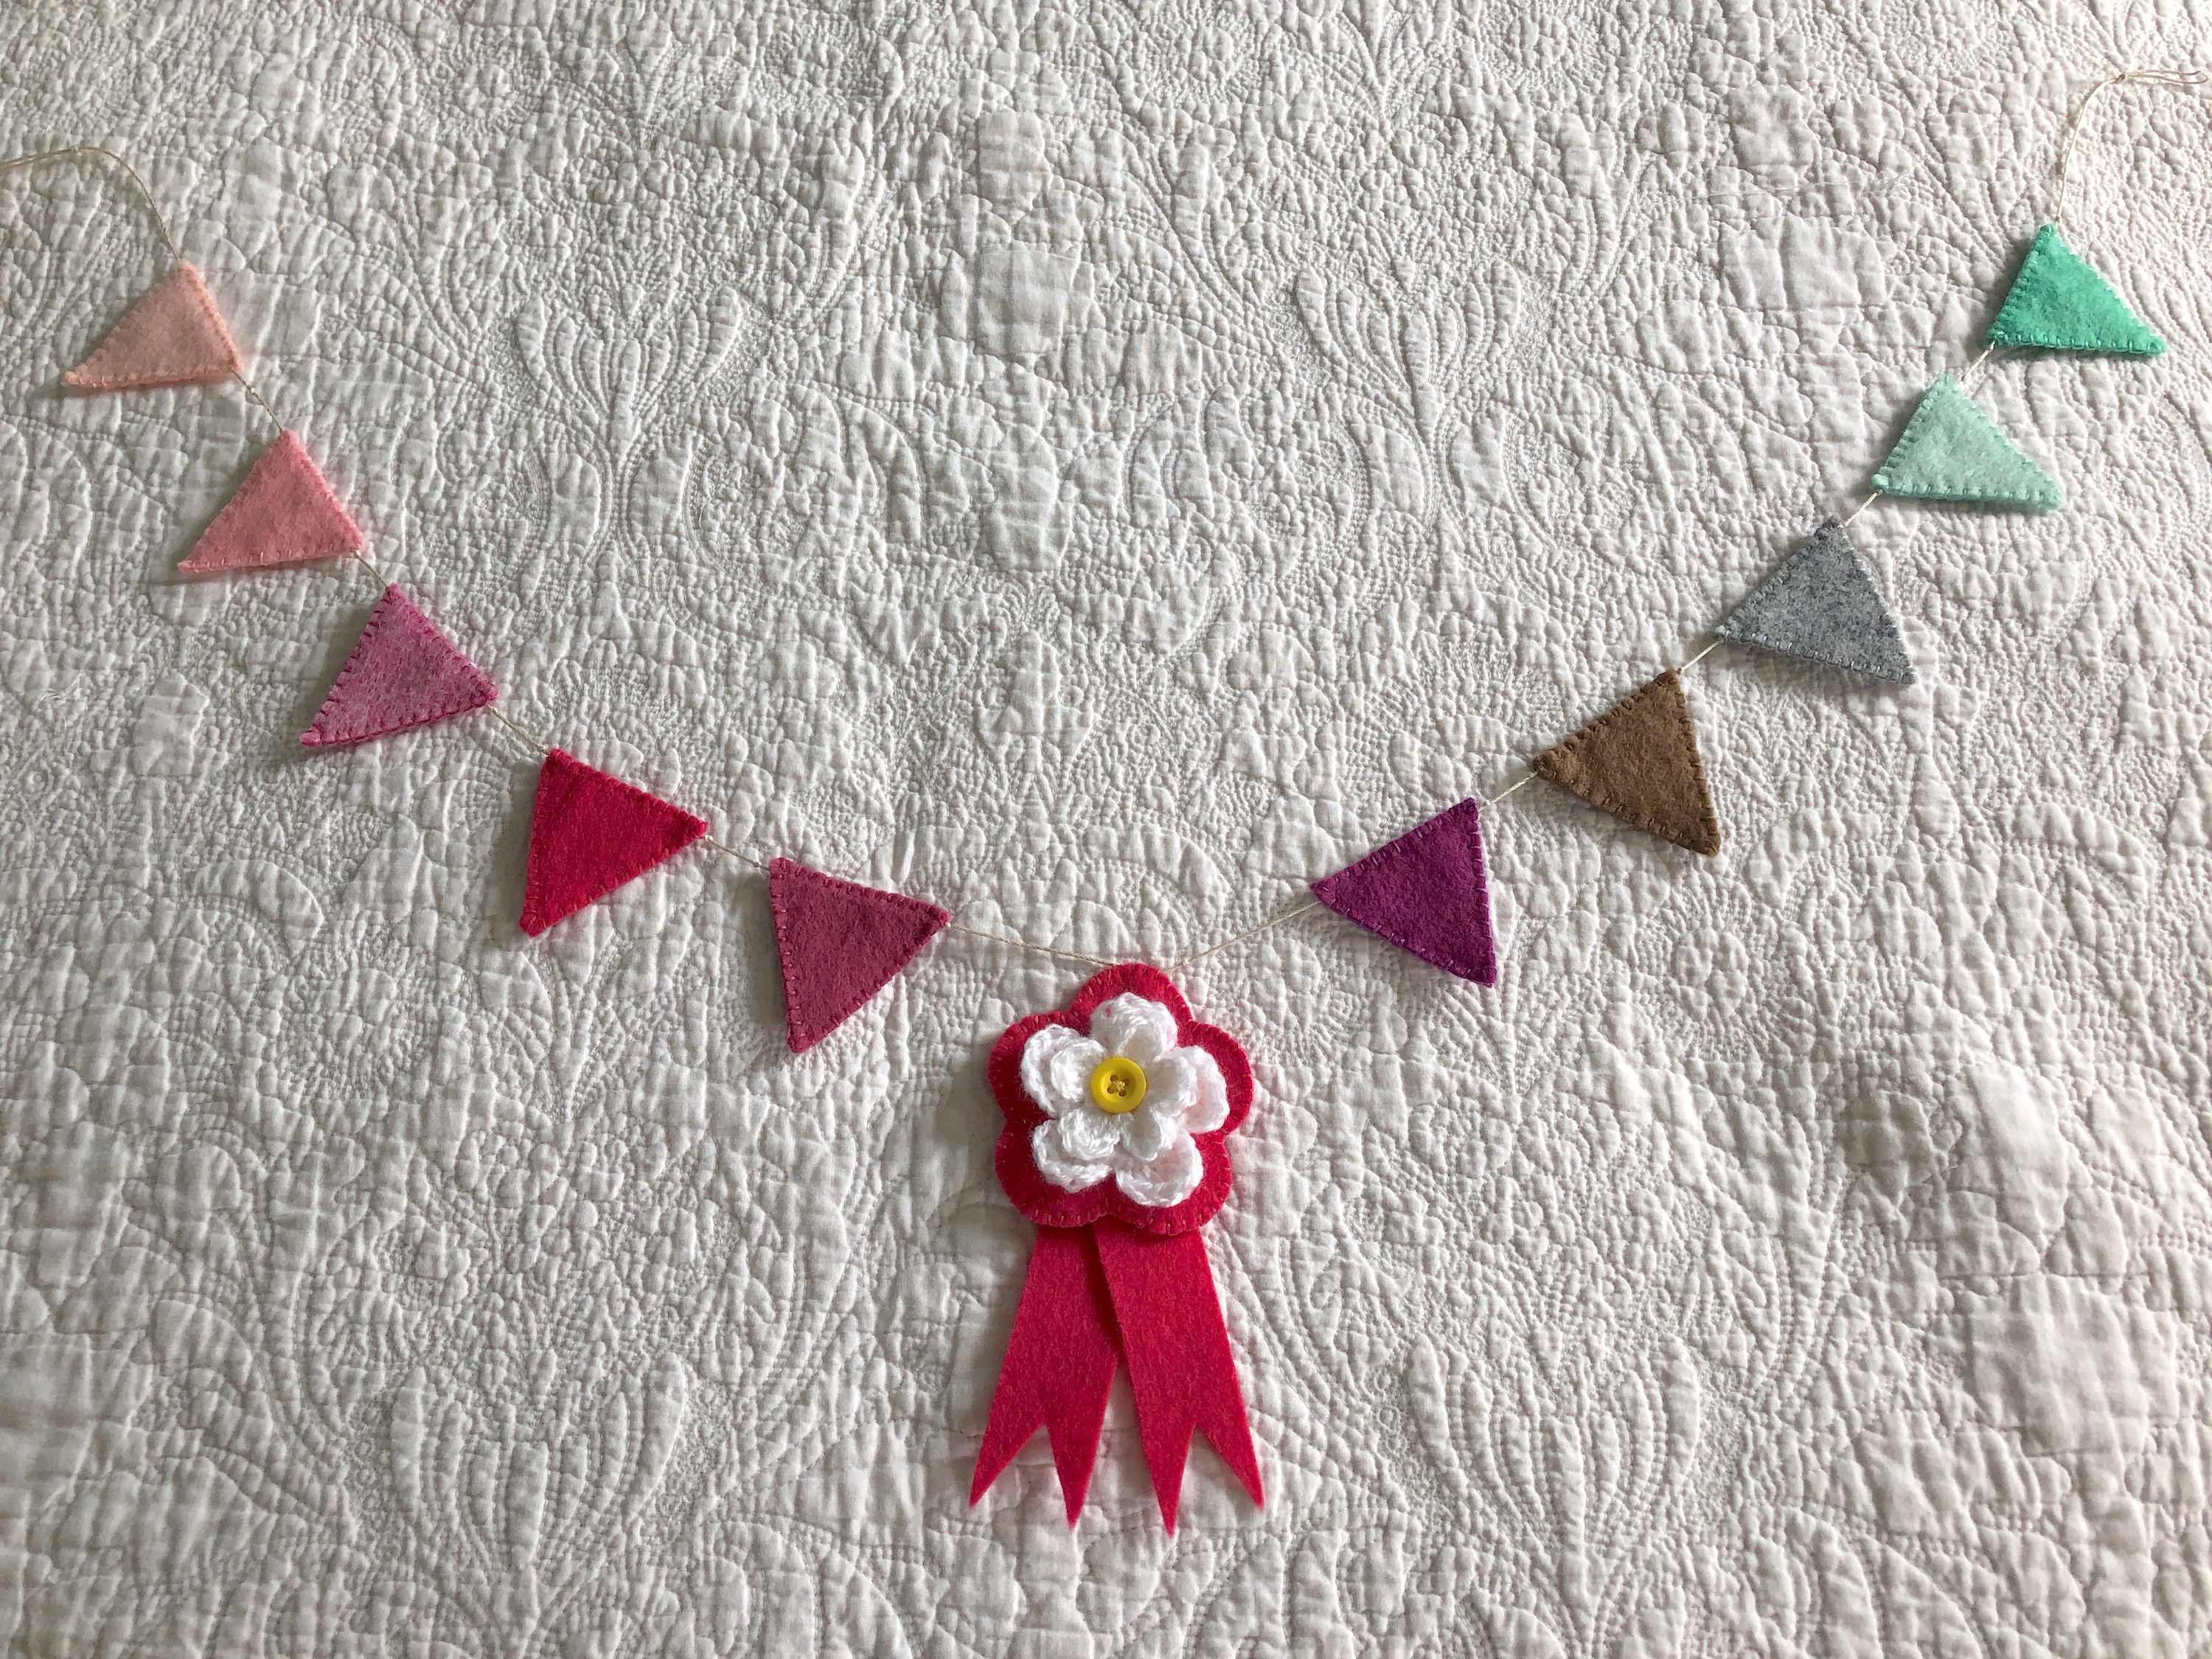 Hand stitched felt bunting with crocheted flower rosette centre.